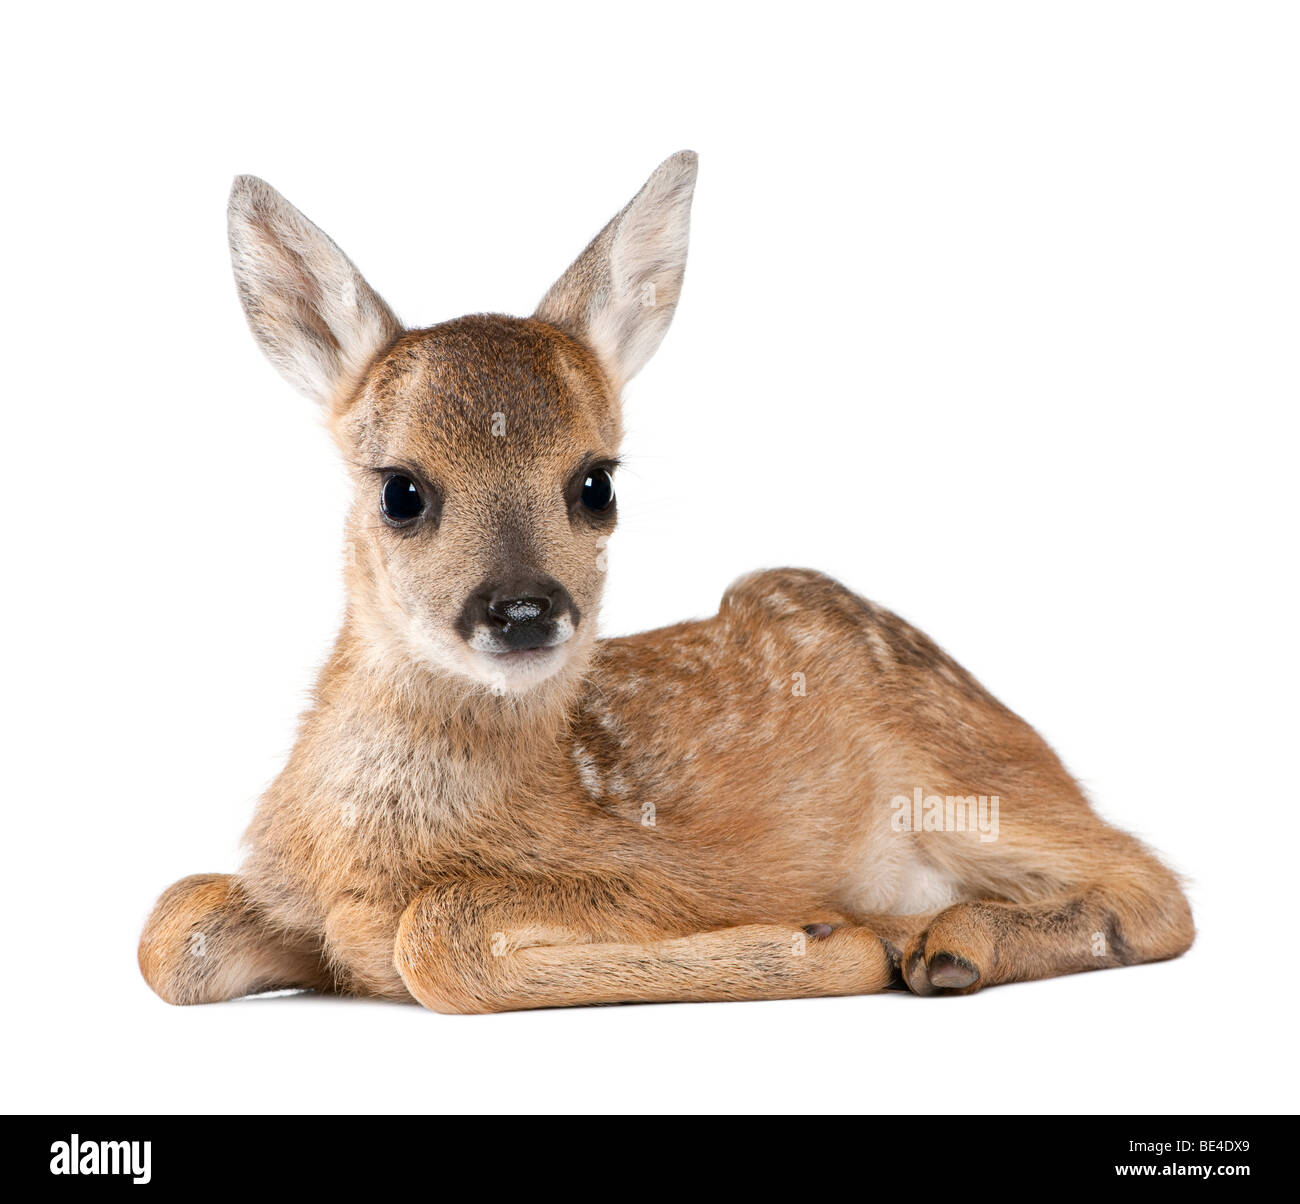 Roe deer Fawn, Capreolus capreolus, 15 days old, in front of a white background Stock Photo